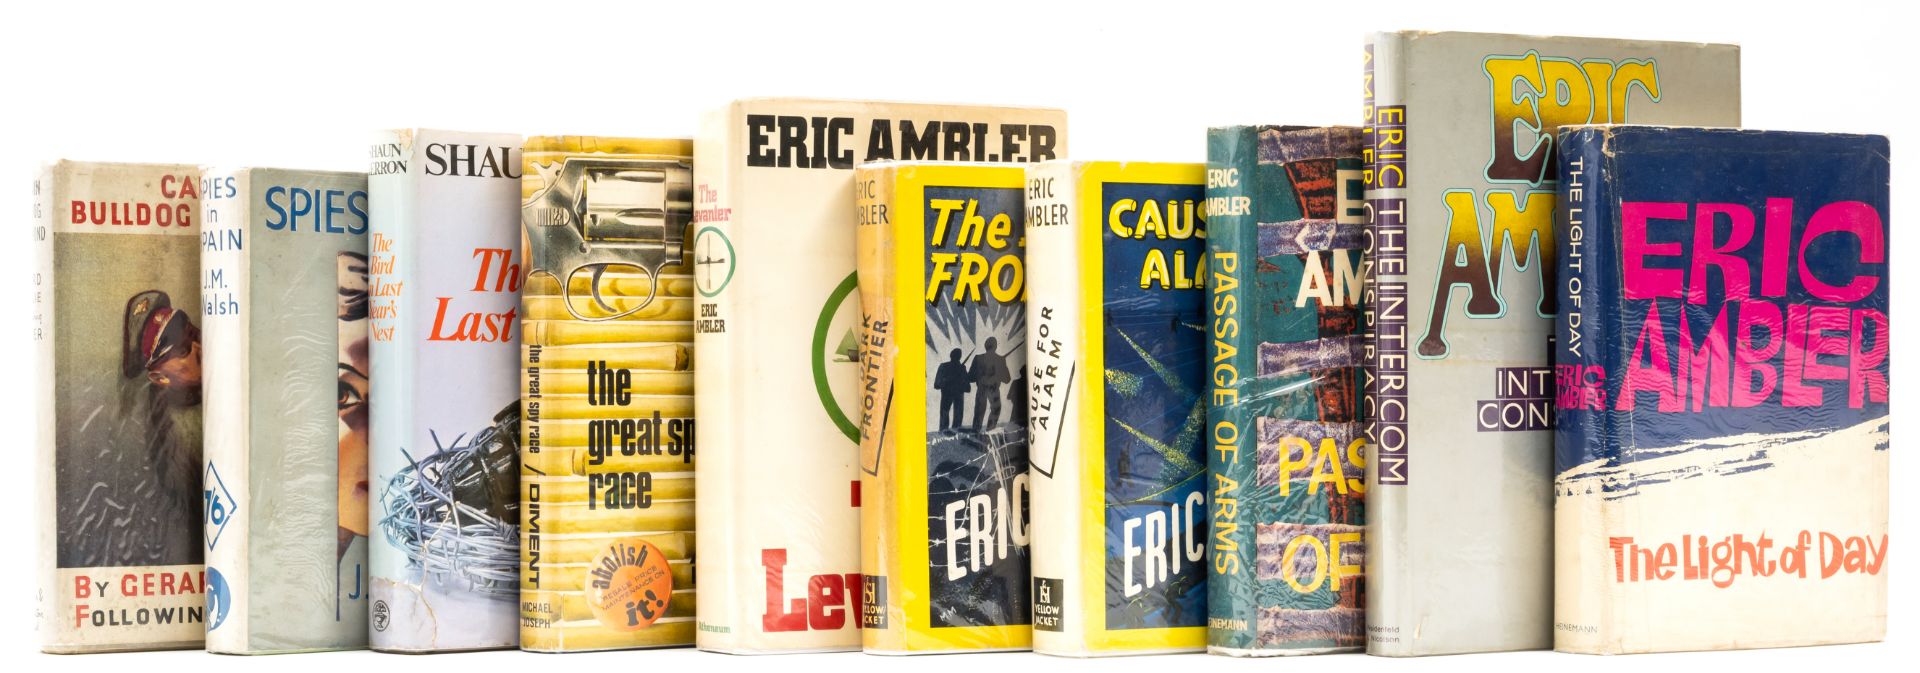 Ambler (Eric) The Light of Day, first edition, 1962 & others, spy fiction (10)